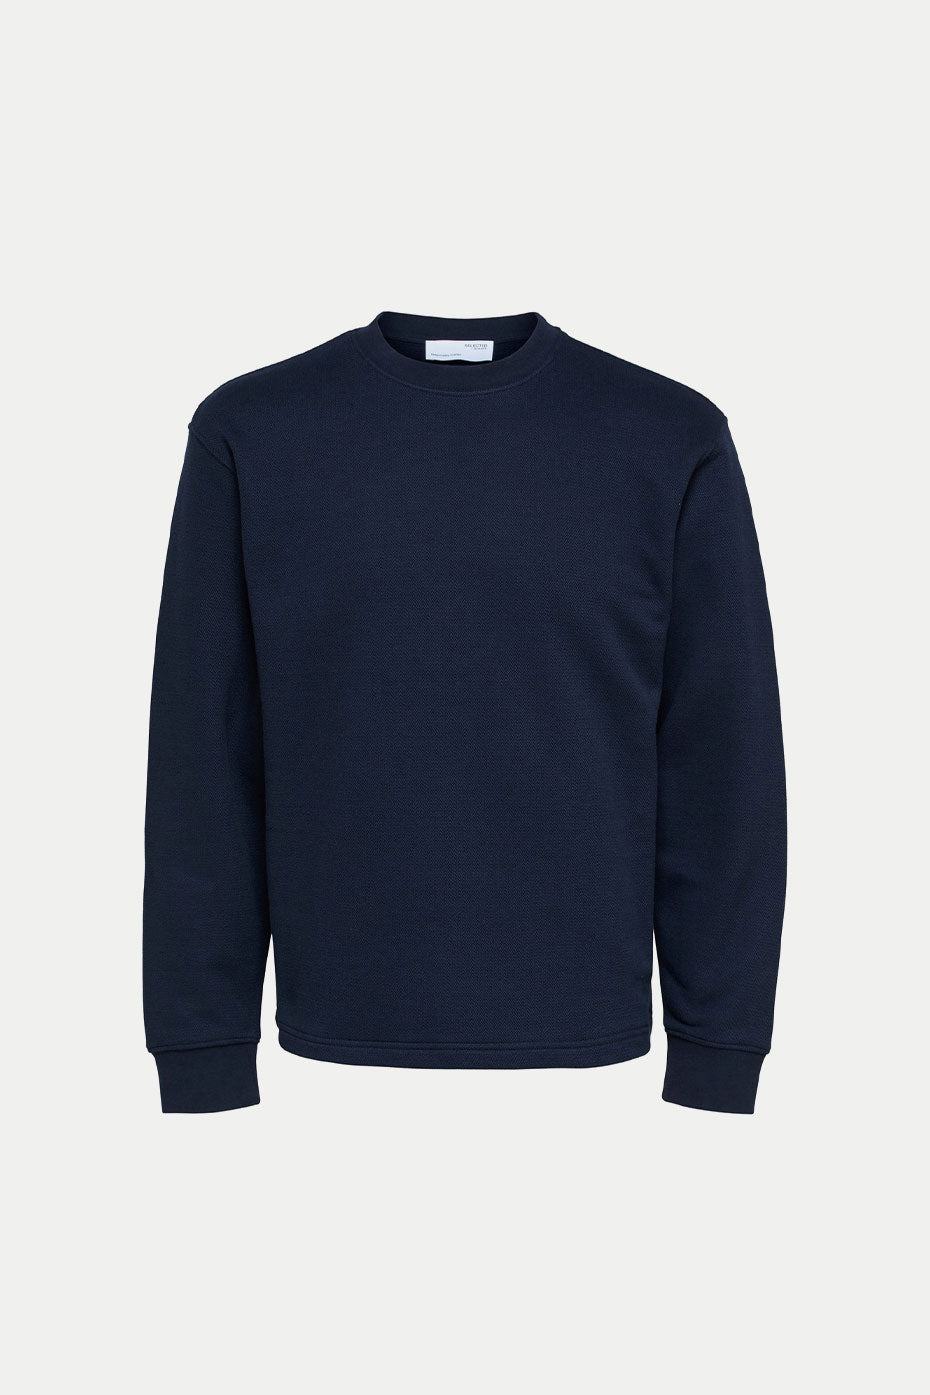 Selected Homme Sky Captain Dimmy Sweat